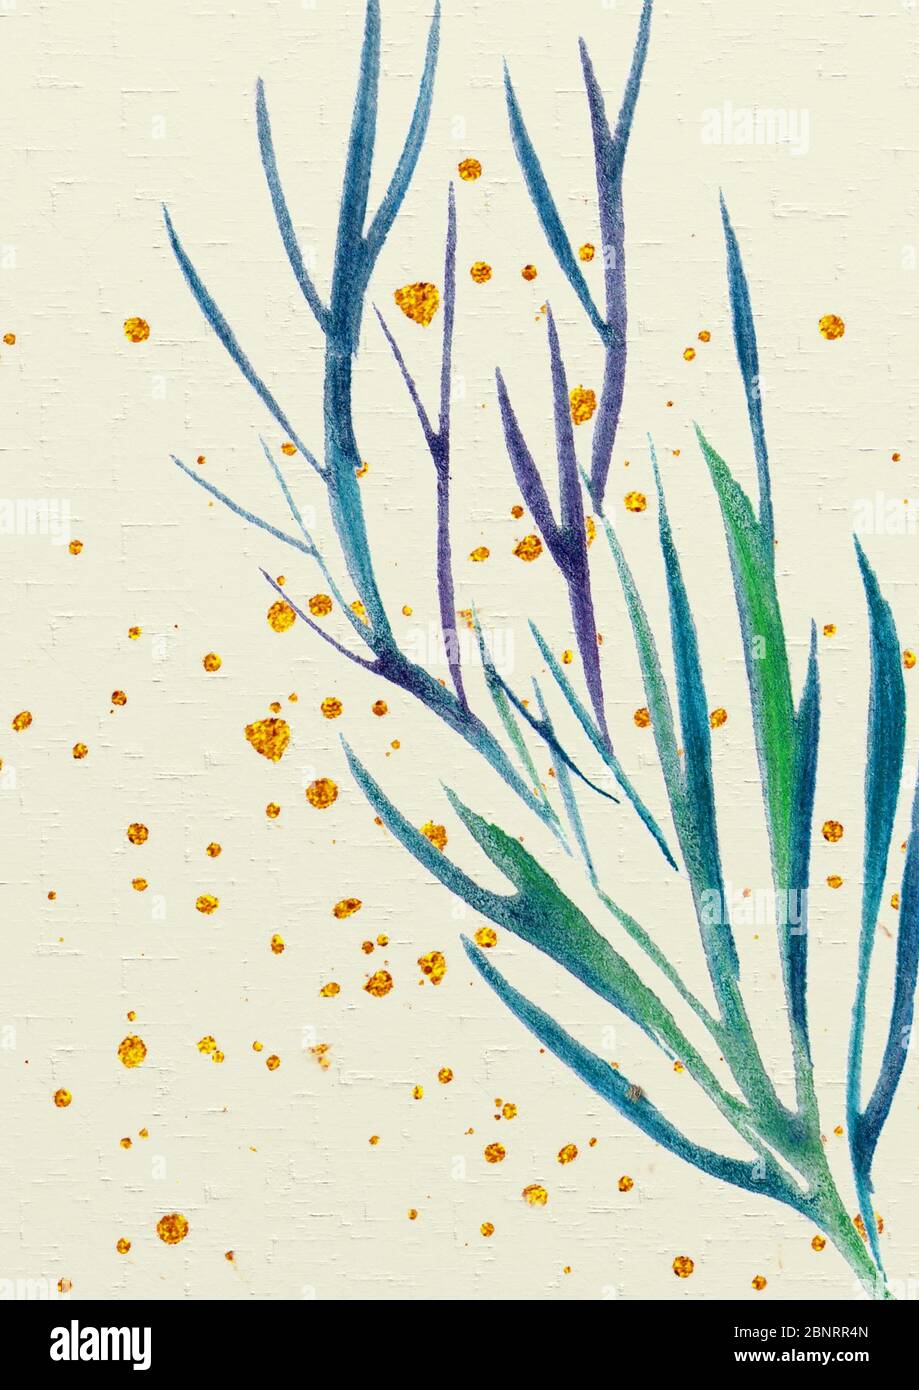 Watercolor illustration. Watercolor florals with golden splats. Hand drawn loose watercolor element. Good for greetings, wedding or invitation cards. Stock Photo